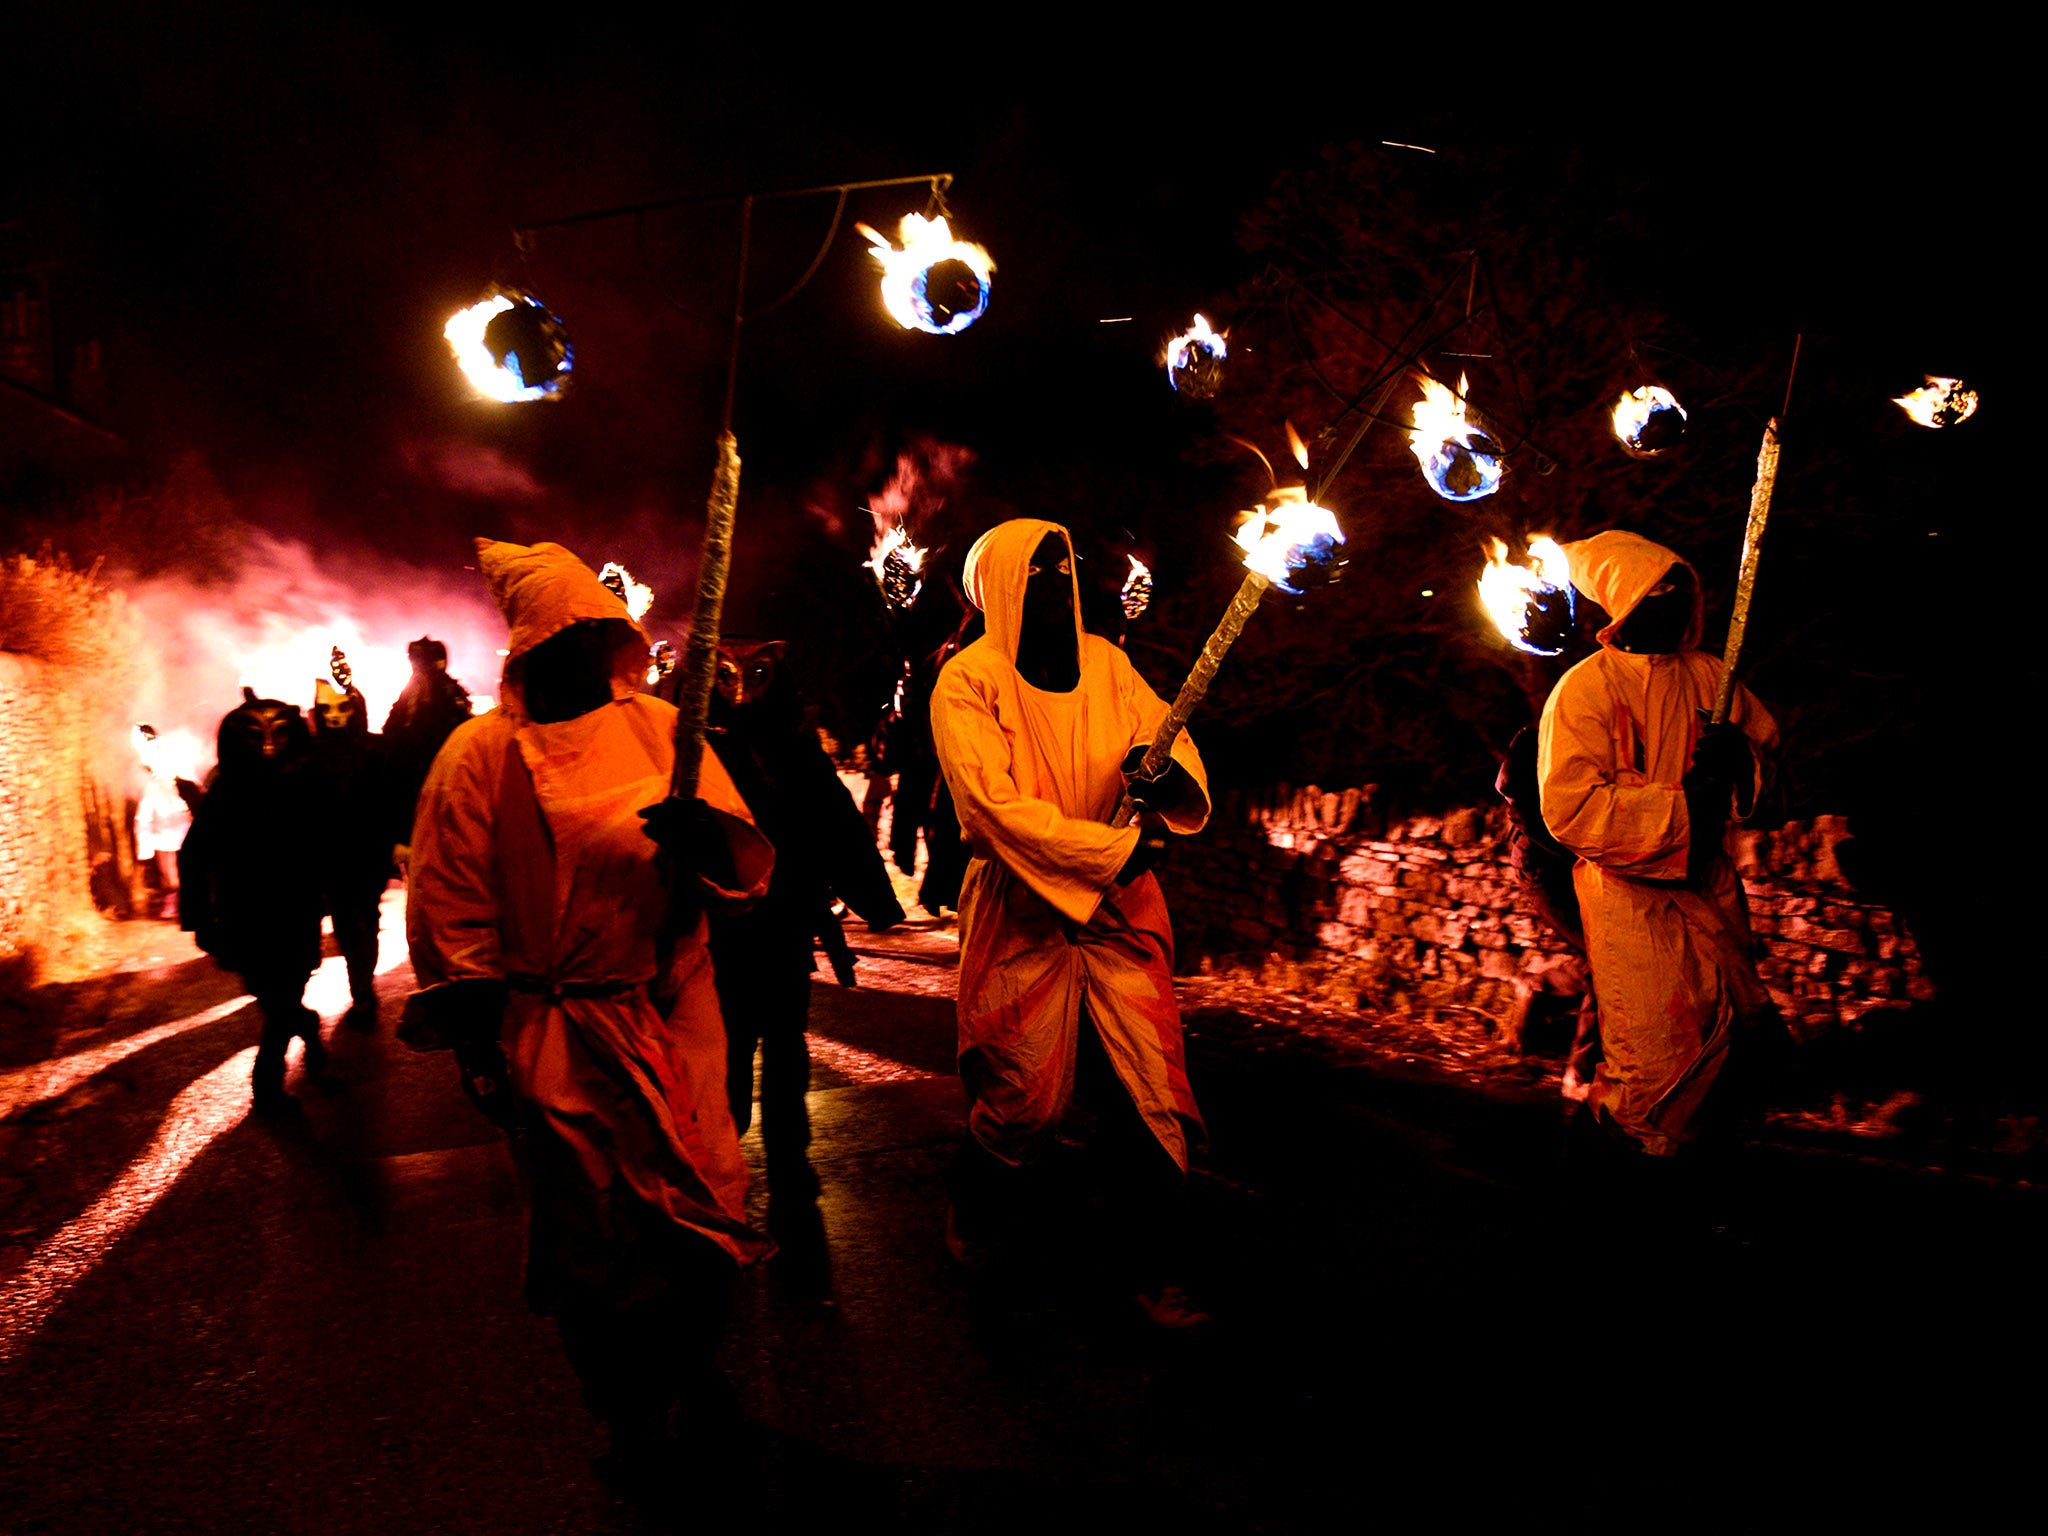 Performers take part in the Imbolc Celtic fire festival to celebrate the end of winter and the coming of spring